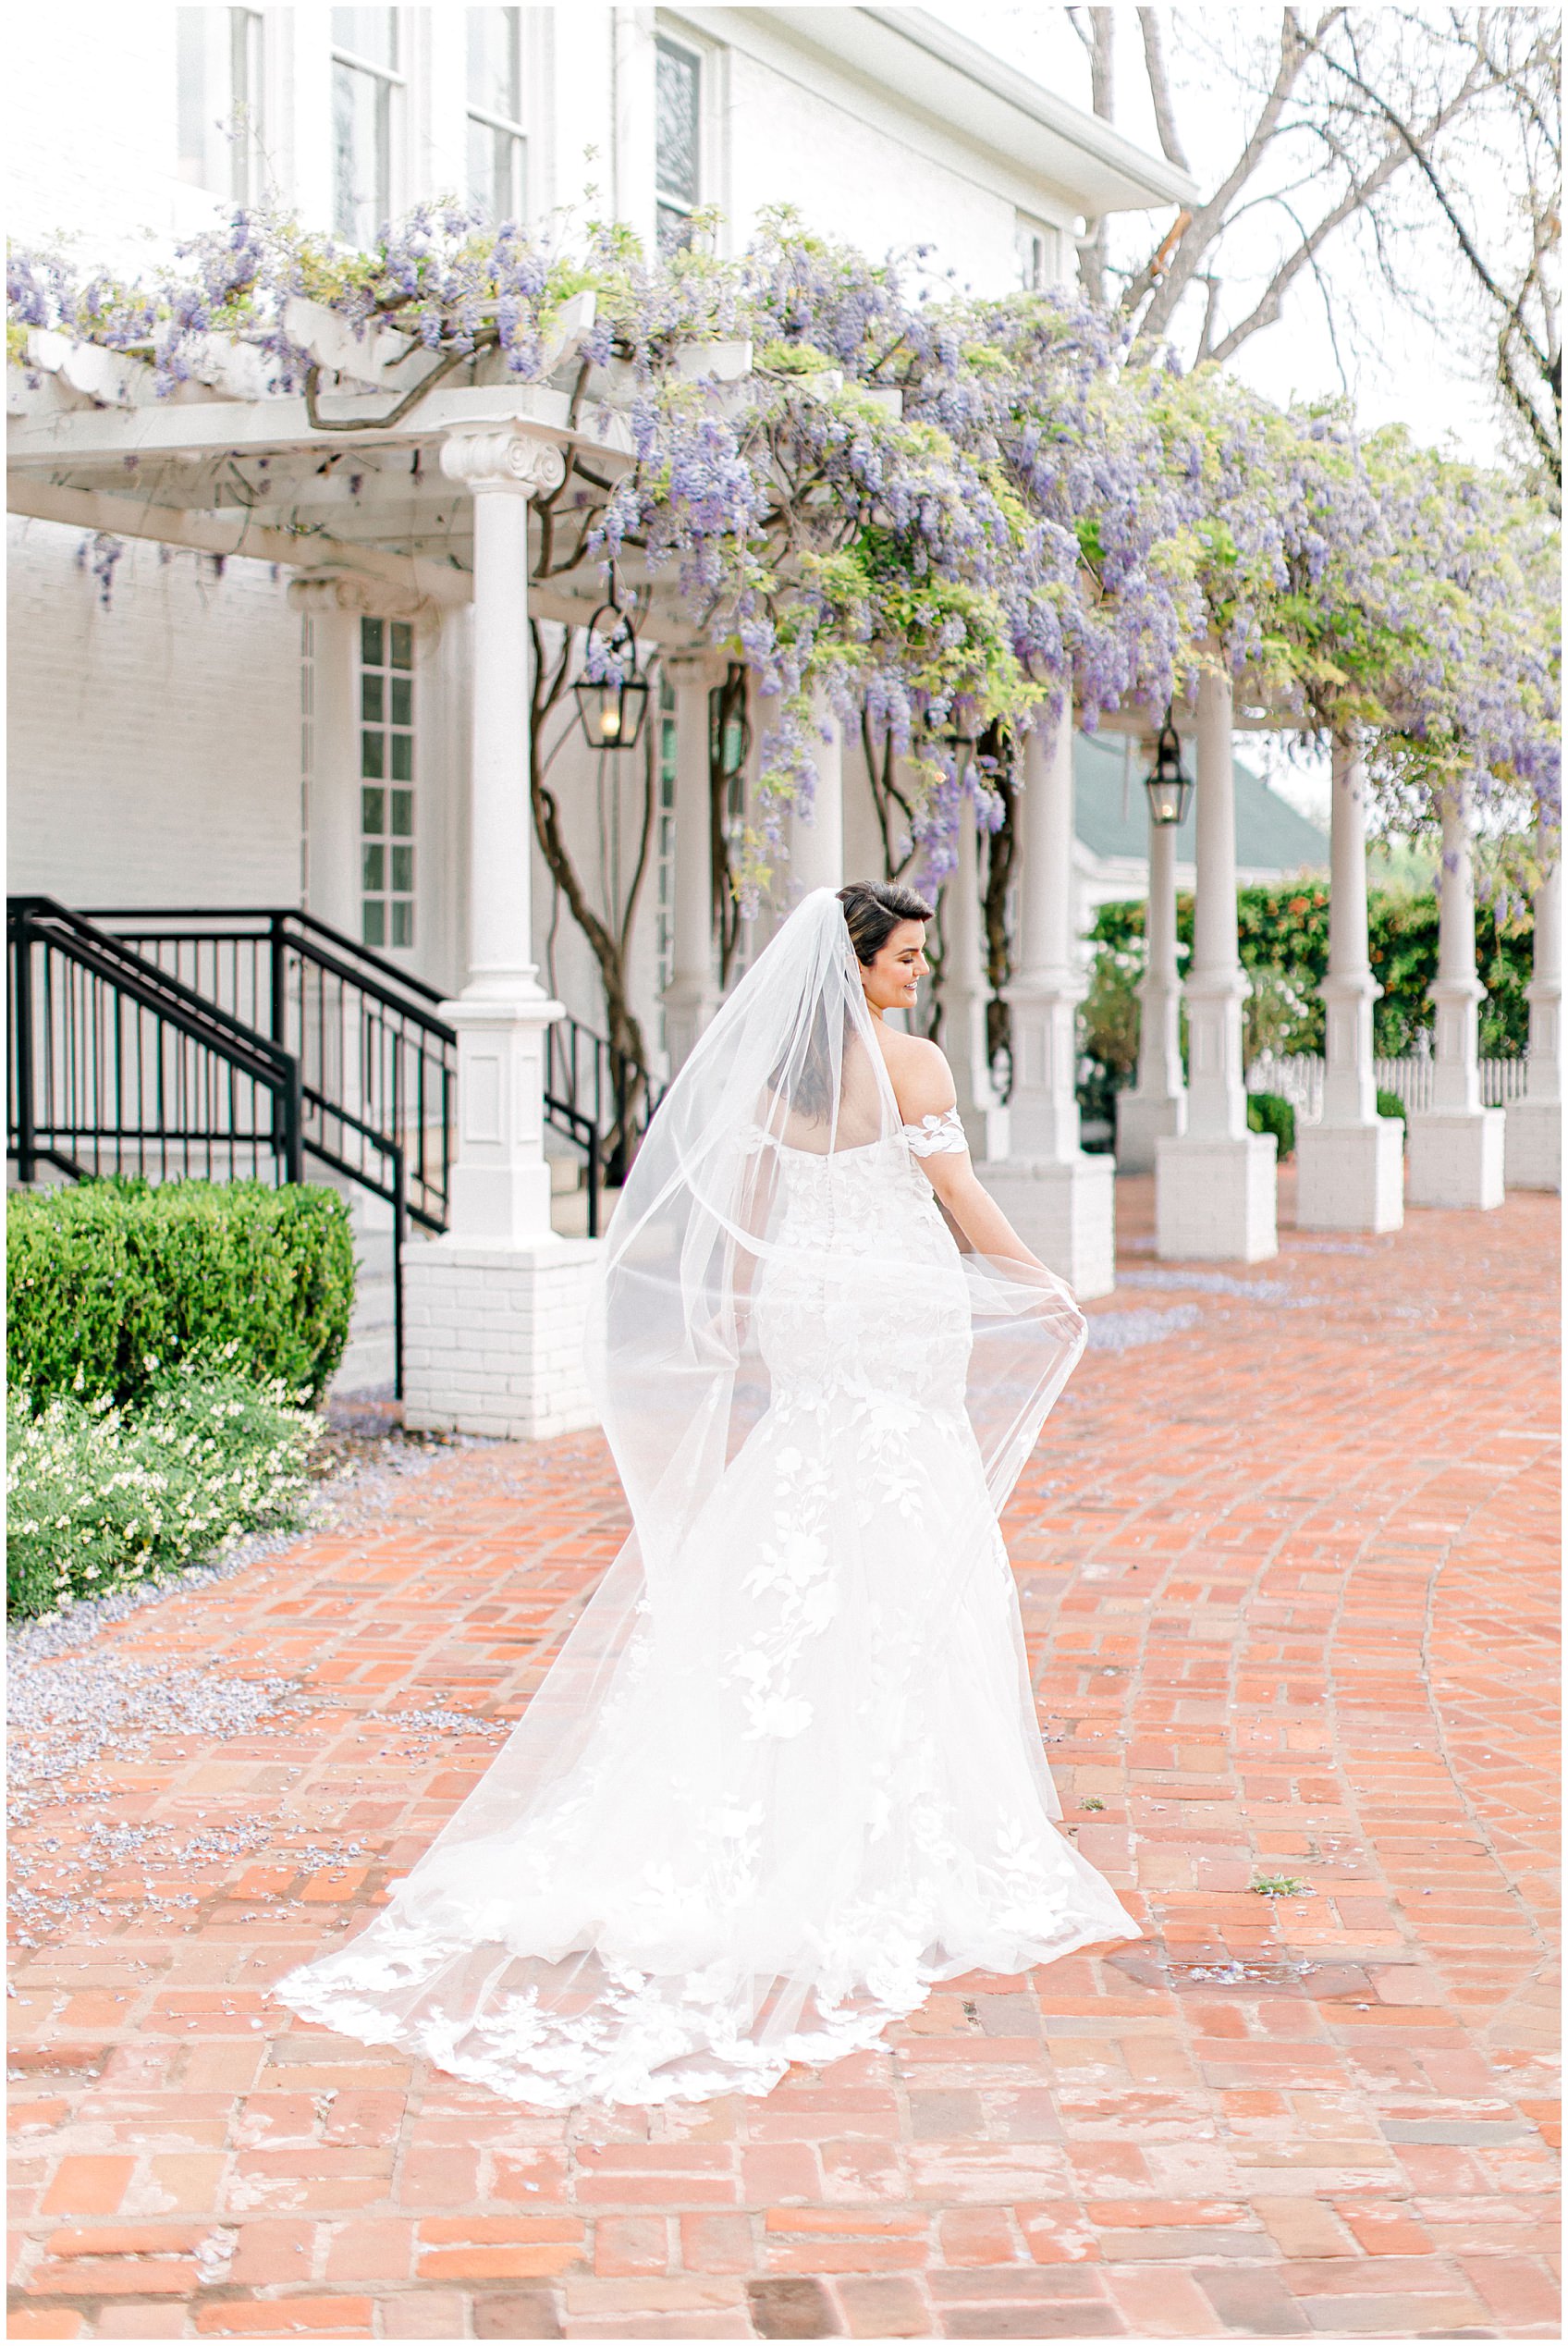 Woodbine Mansion Spring Bridal wedding Photos by Allison Jeffers Photography 0021